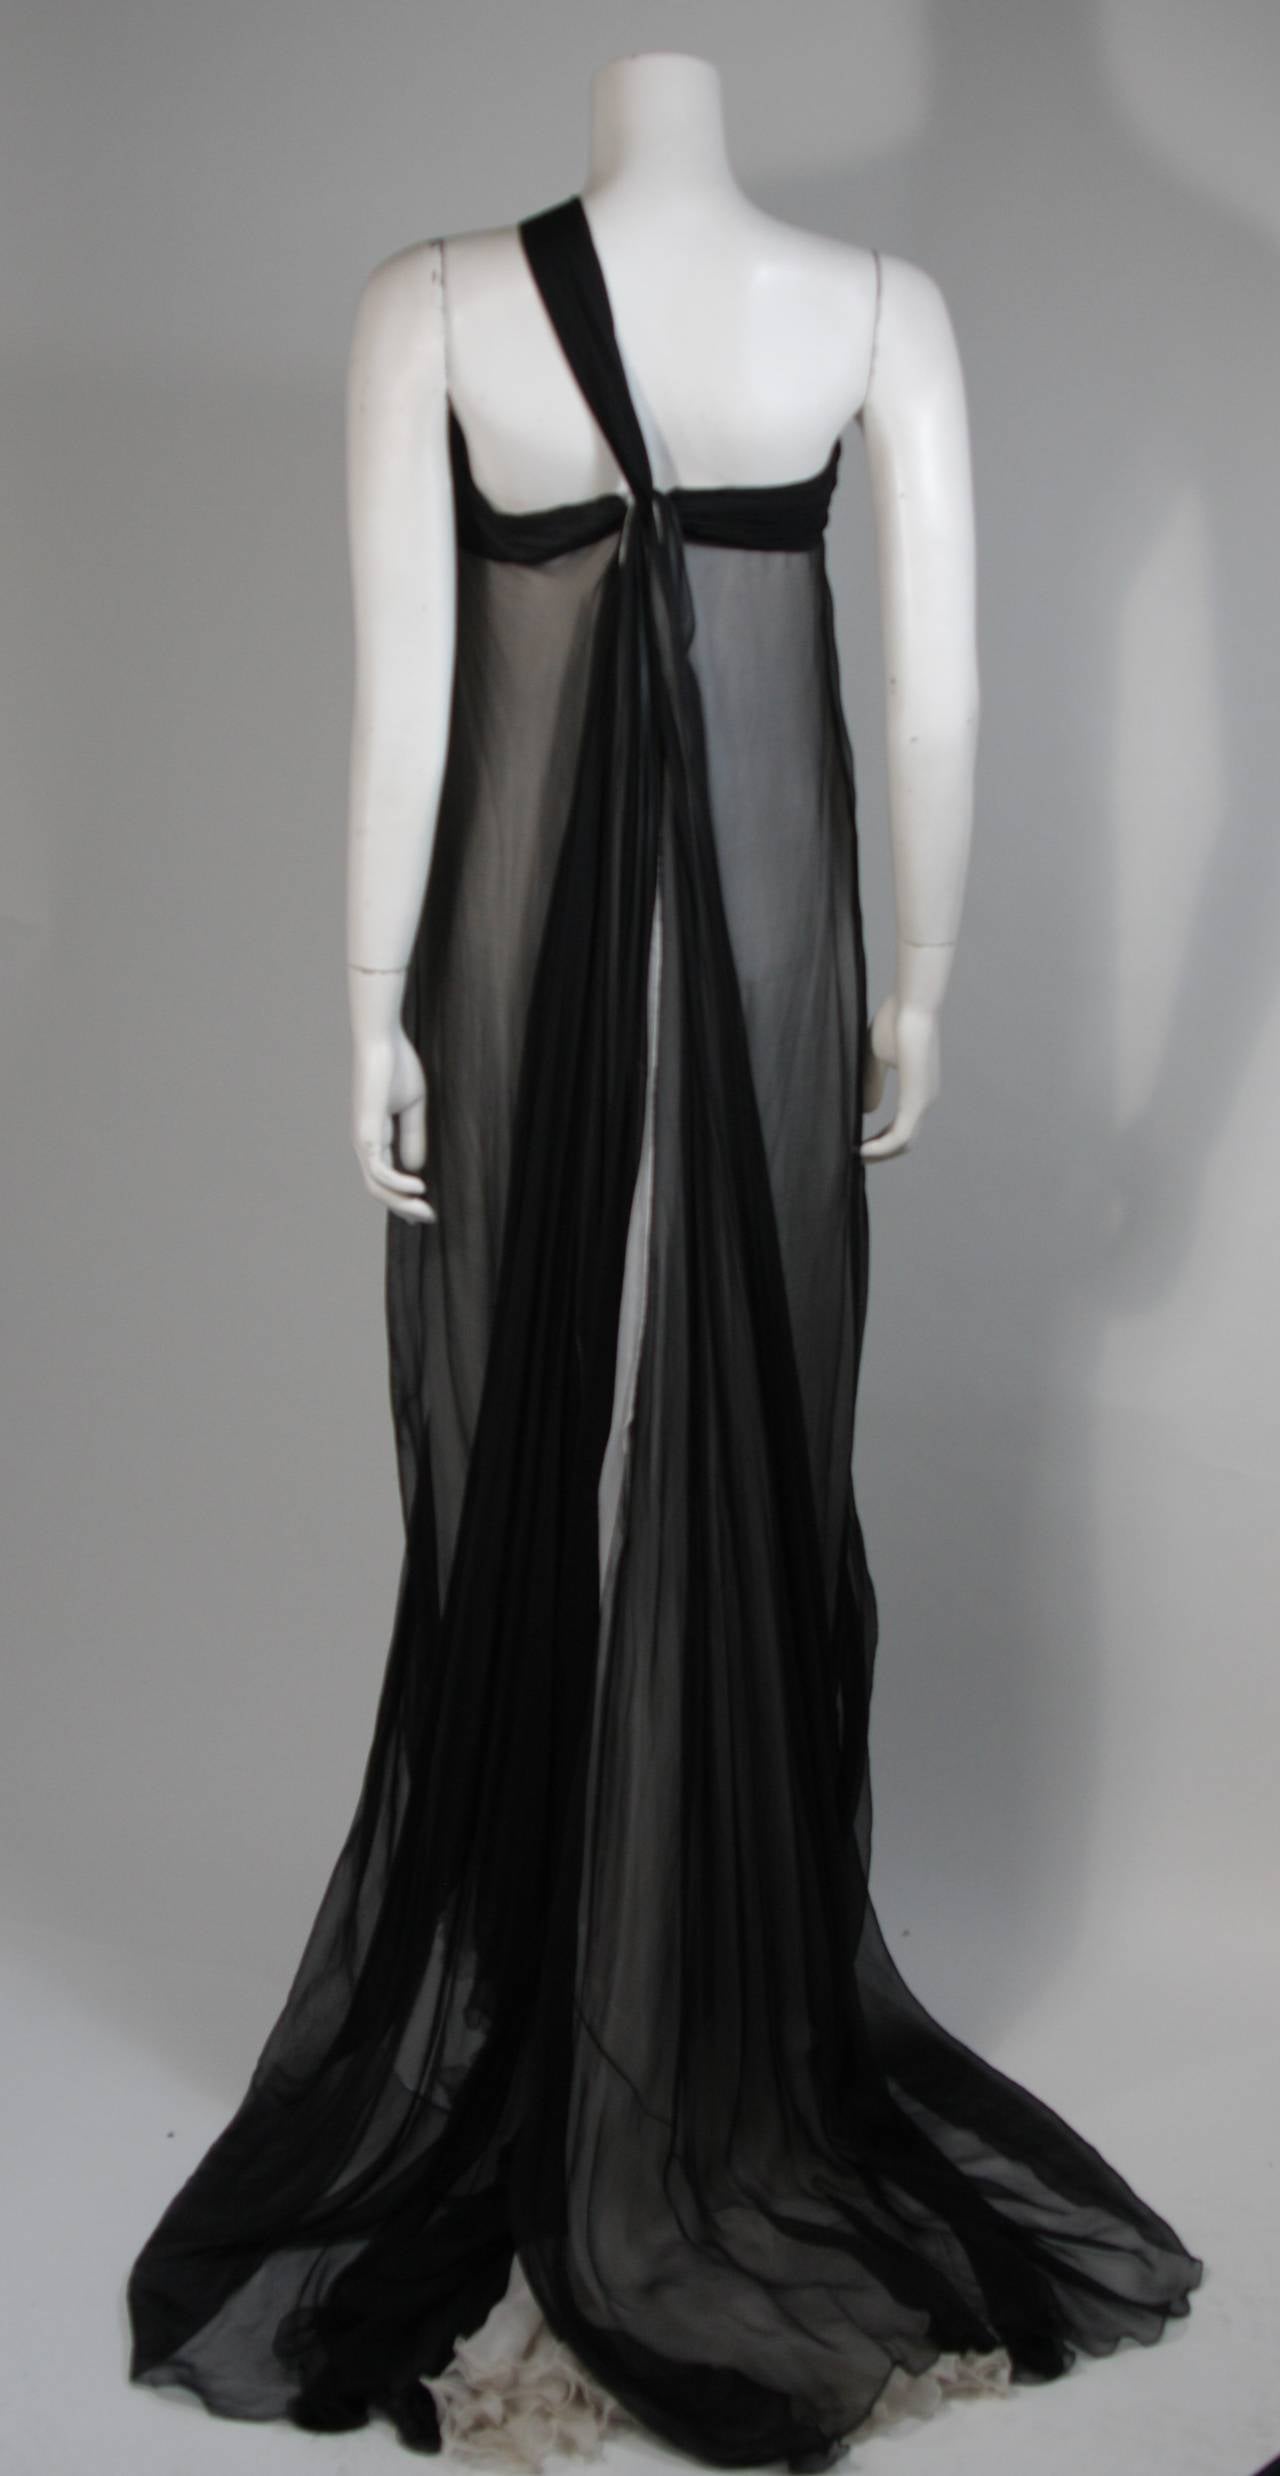 Jacqueline De Ribes Black and Ivory Silk Chiffon Gown Size For Sale 4